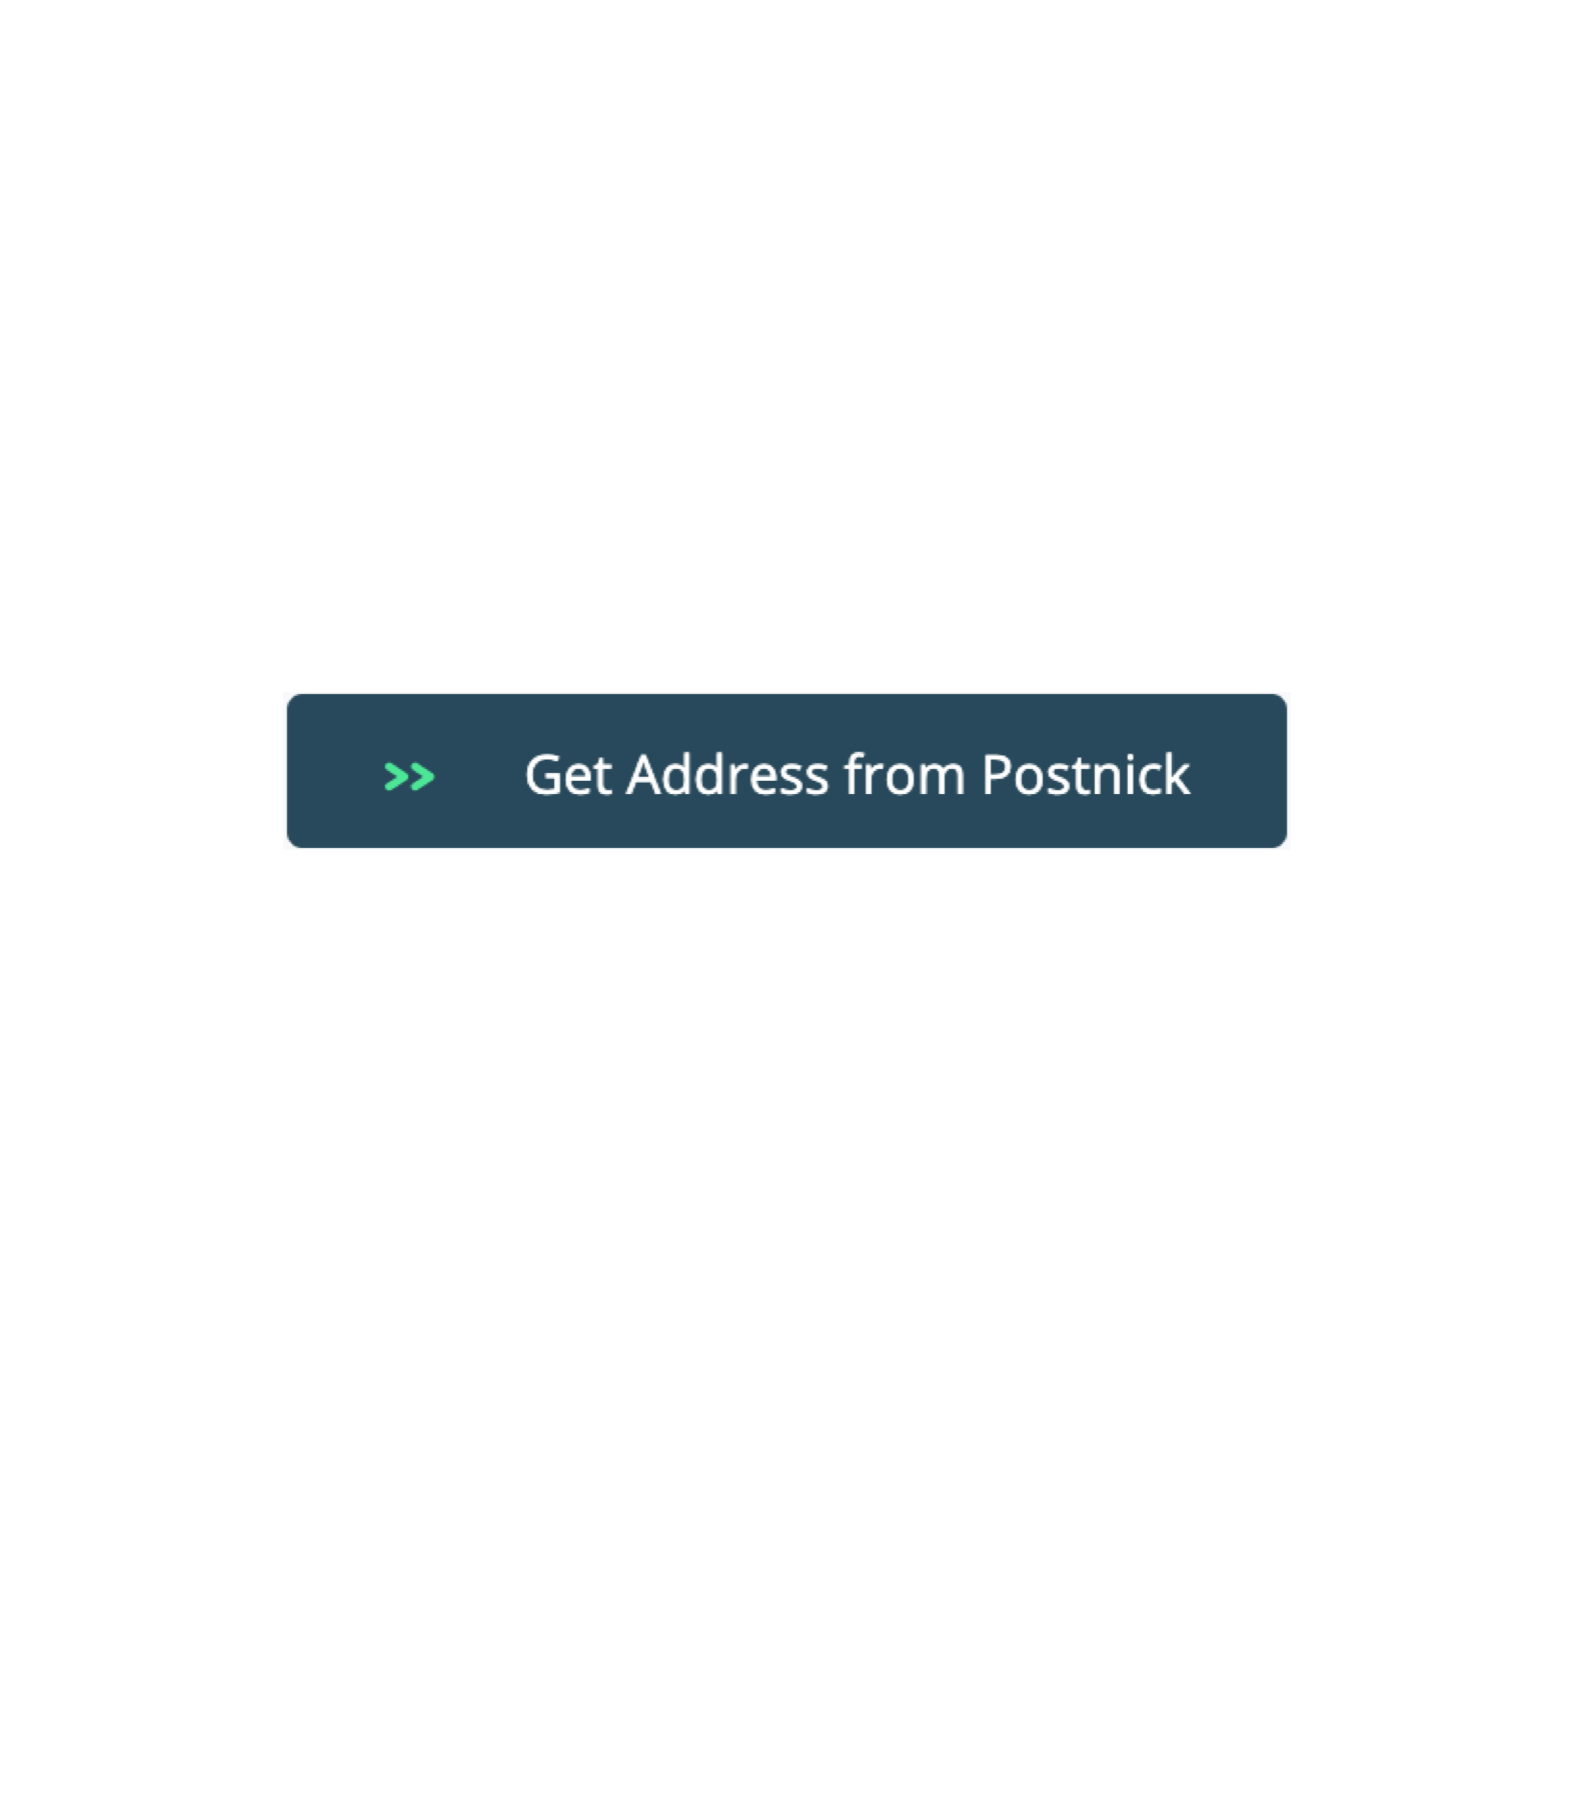 This Postnick button will be displayed in the integrated websites and users will be able get address details from Postnick.